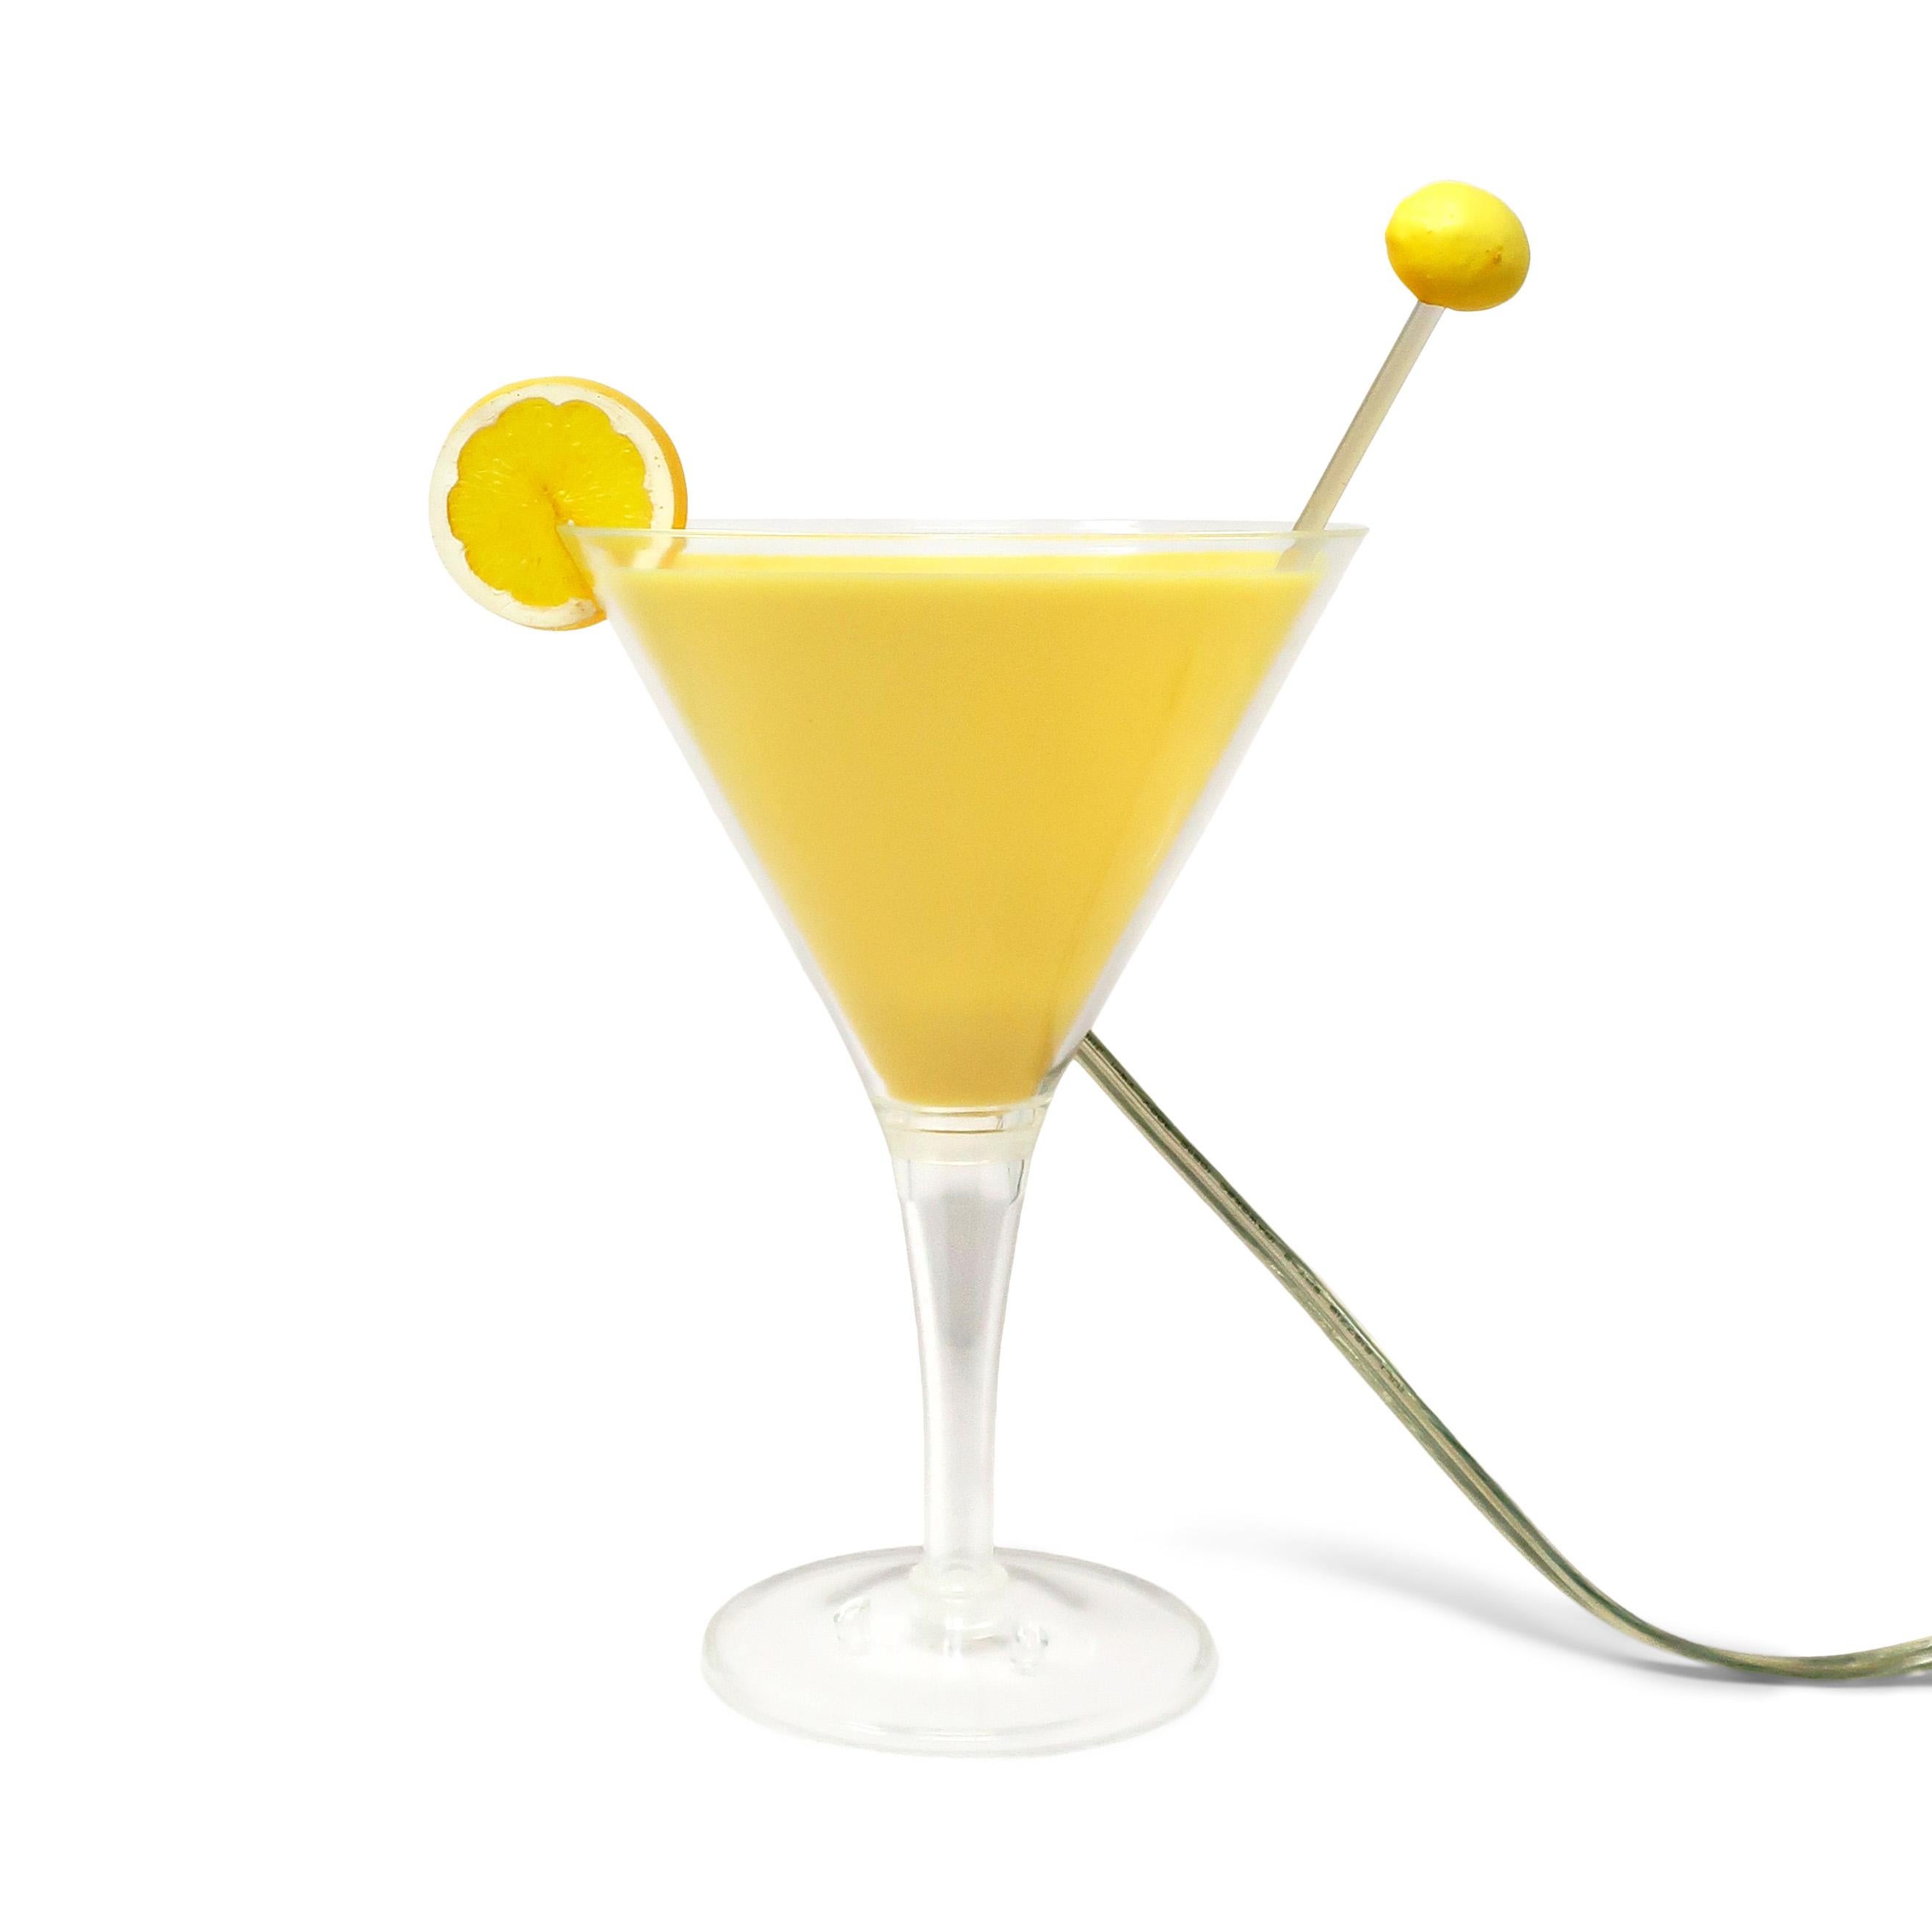 A hard-to-find postmodern cocktail lamp with a clear lucite martini-shaped glass, yellow shading to look like a full lemon drop cocktail, and a stick with a slice of lemon on the end. Great for lovers of pop art, barware, martinis, or awesome